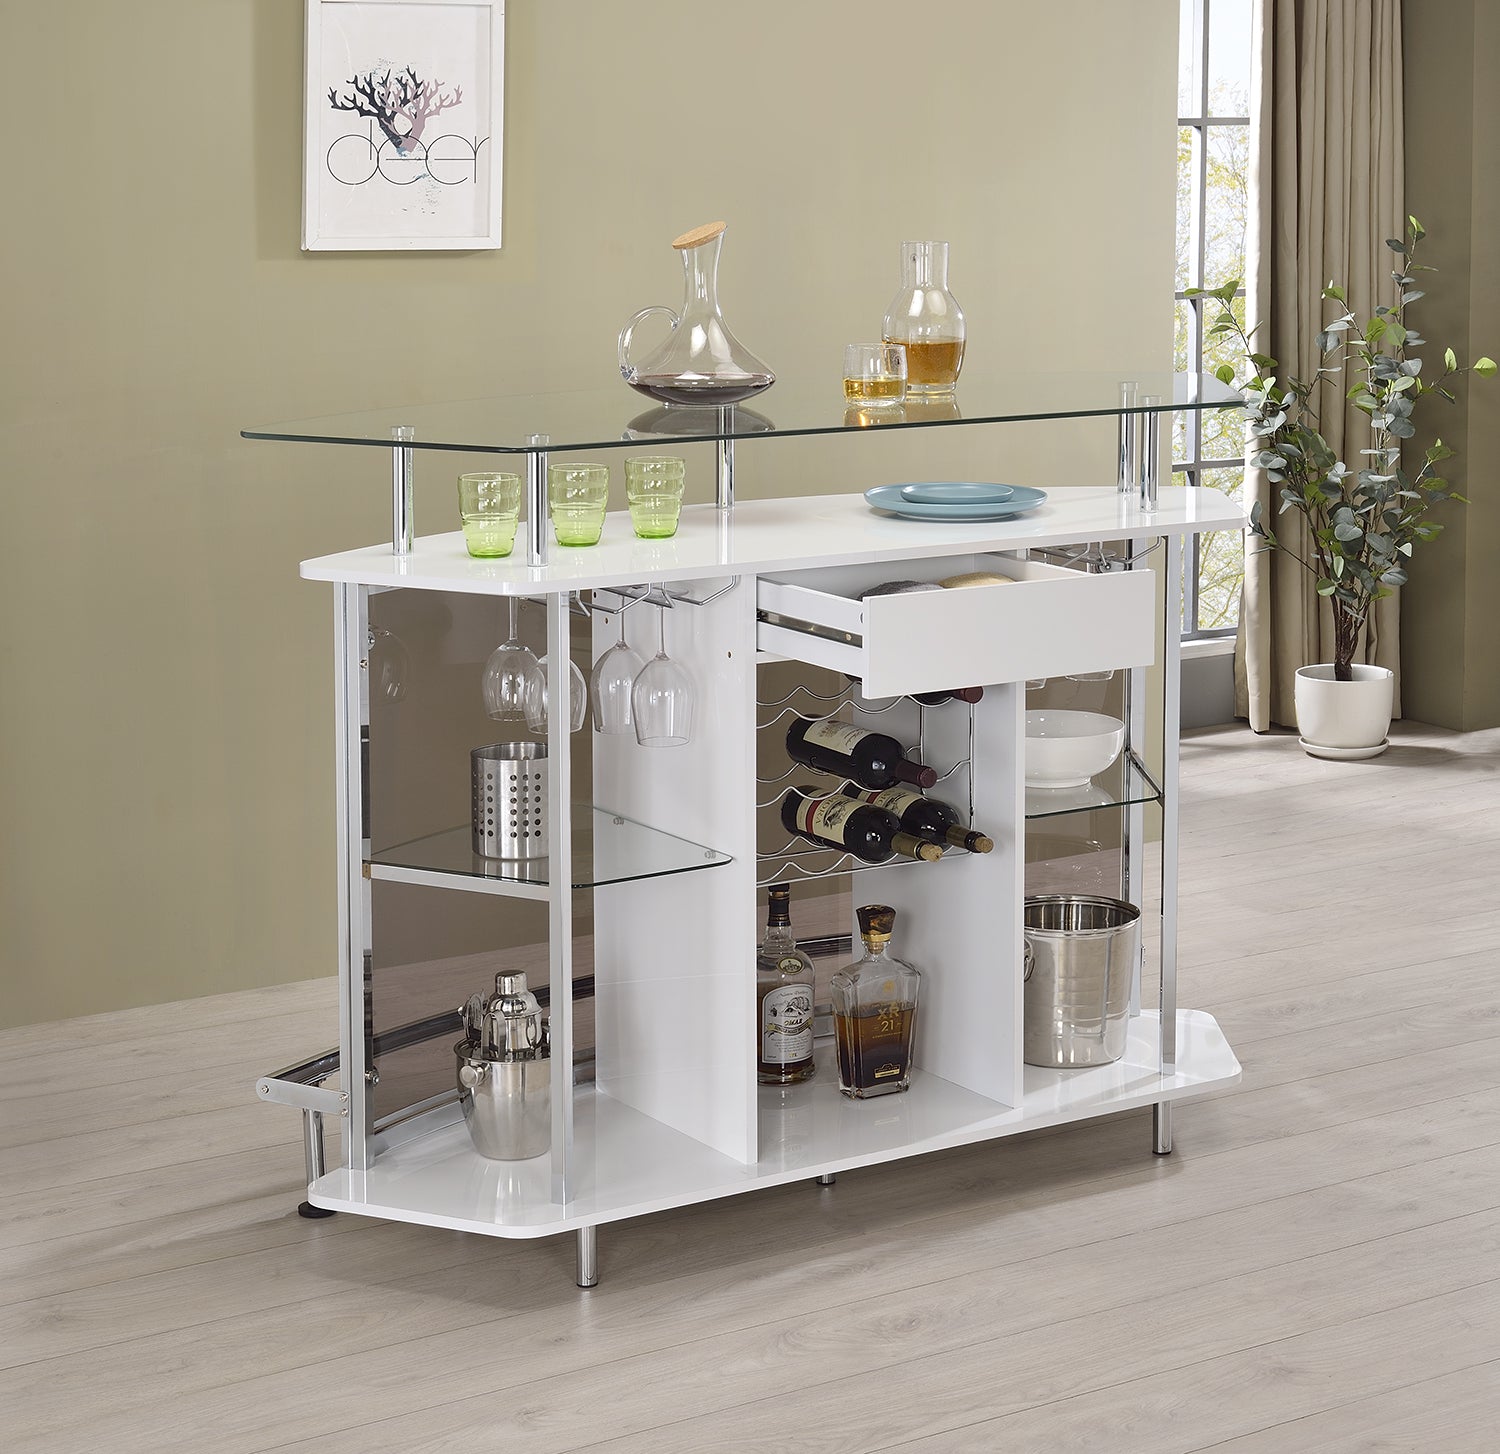 Gideon Crescent Shaped Glass Top Bar Unit with Drawer Home Bar White